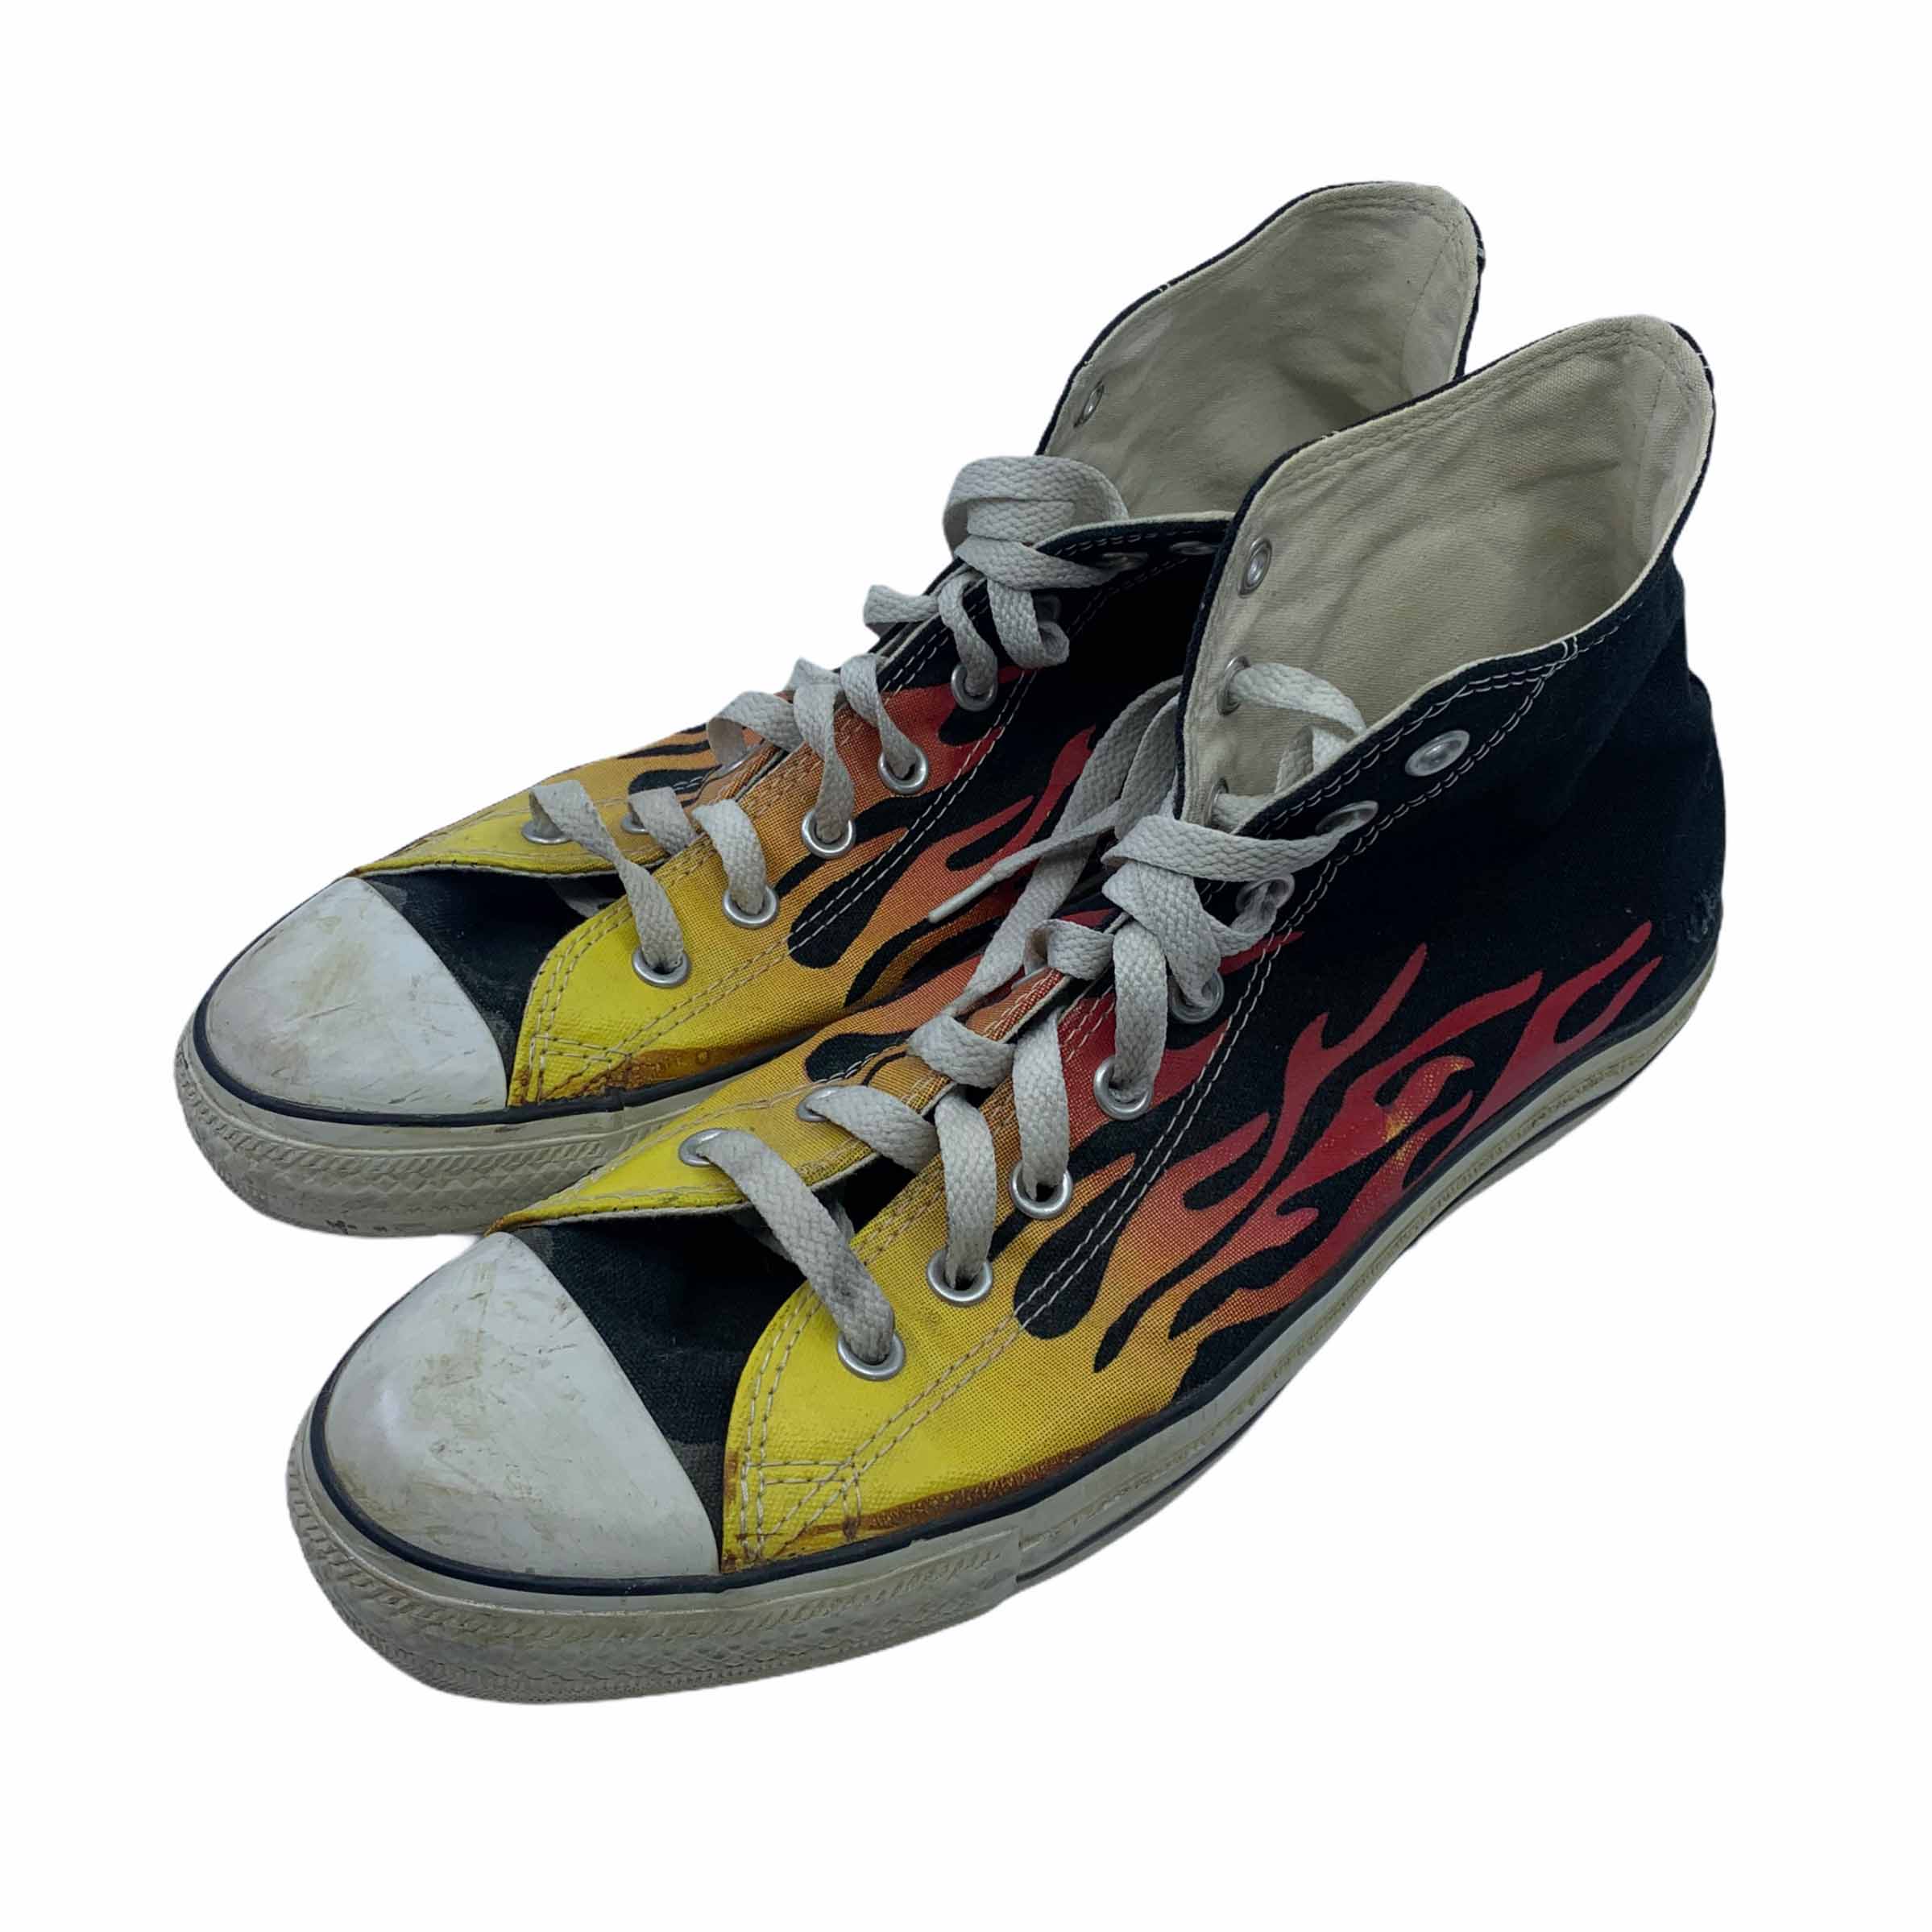 [Converse] Flame Graphic All Star 오리지널 원판 버전 - Size US11